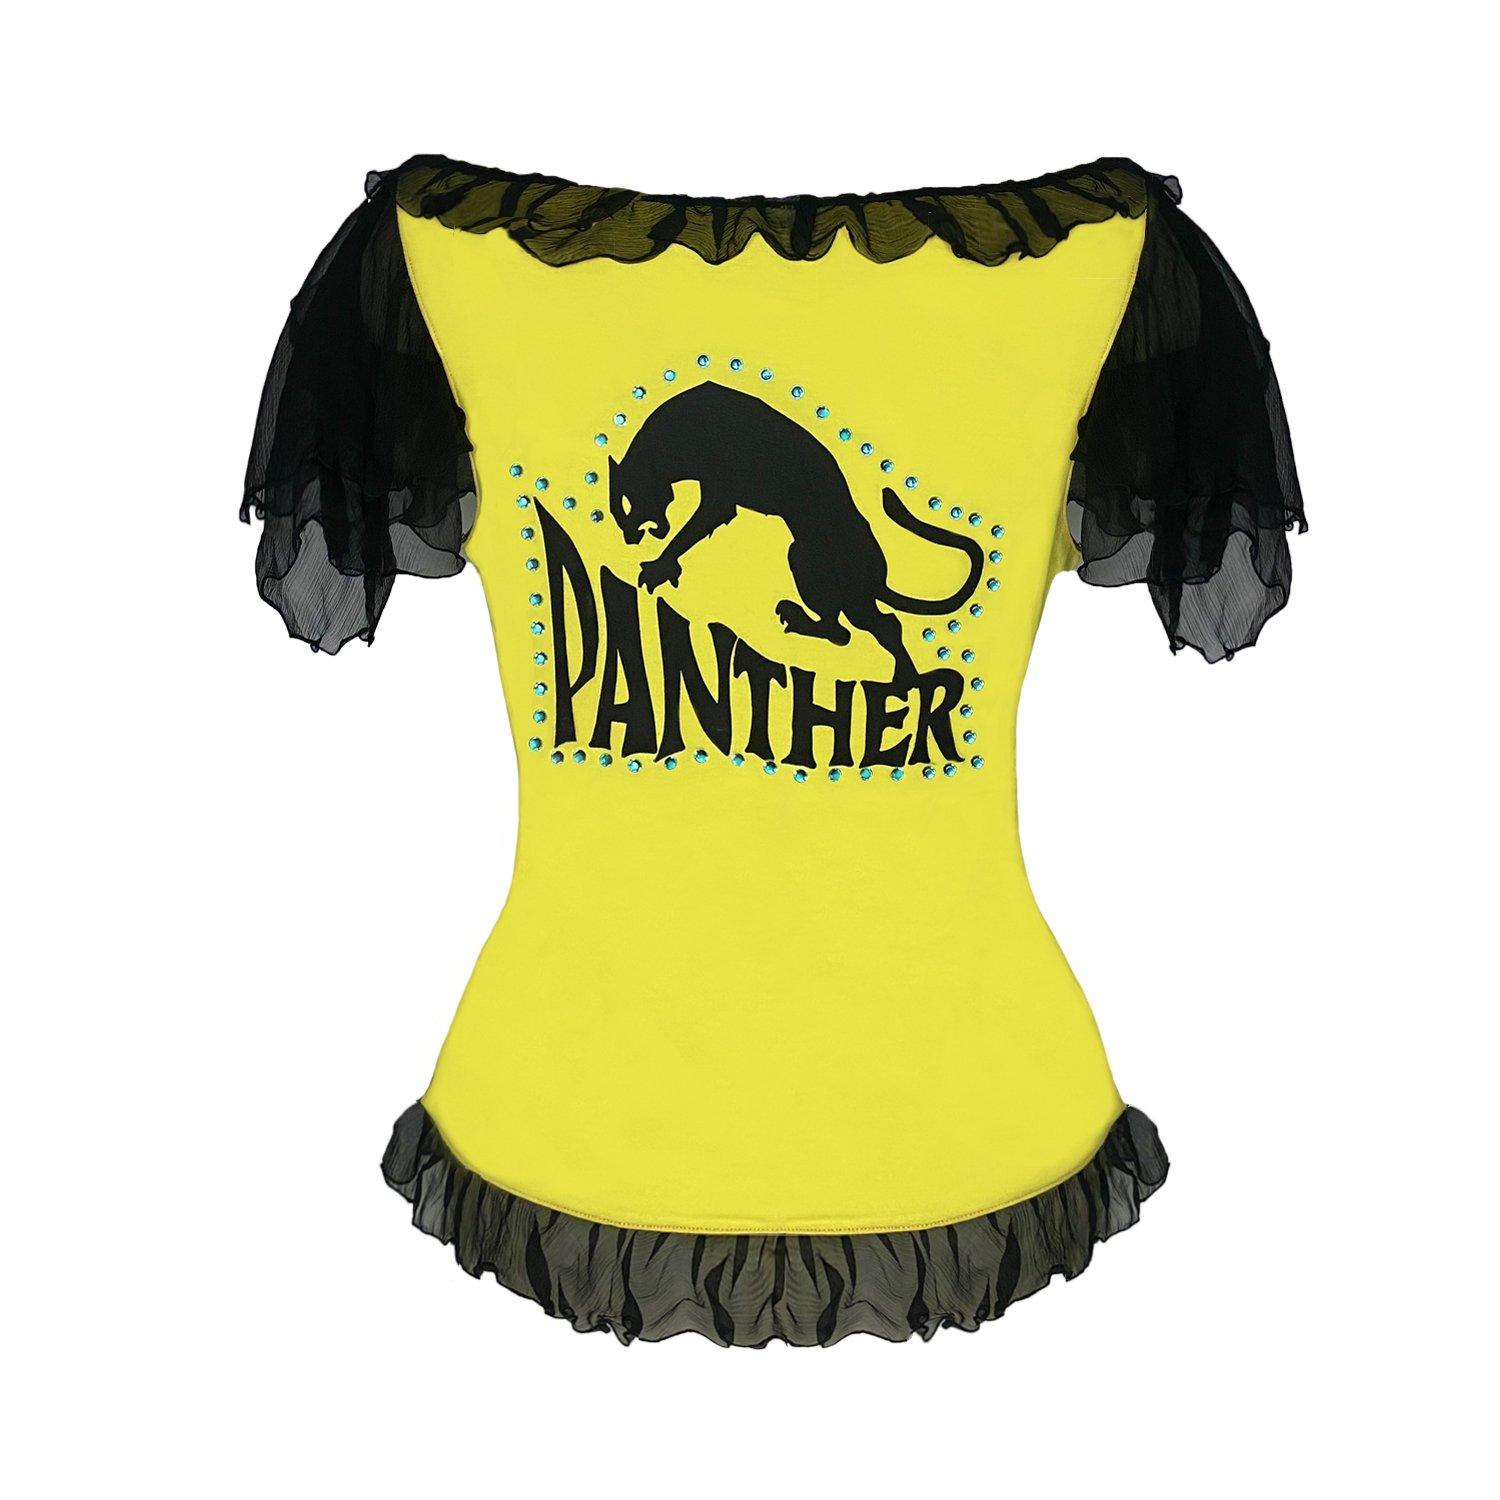 Iconic rare D&G 2000’s contrasting two-tone top with ruffle hem by Dolce & Gabbana. Completely sheer front and sleeves, and a yellow cotton tank to the back featuring a black panther graphic with a blue diamante rhinestone outline. Hidden zip on the